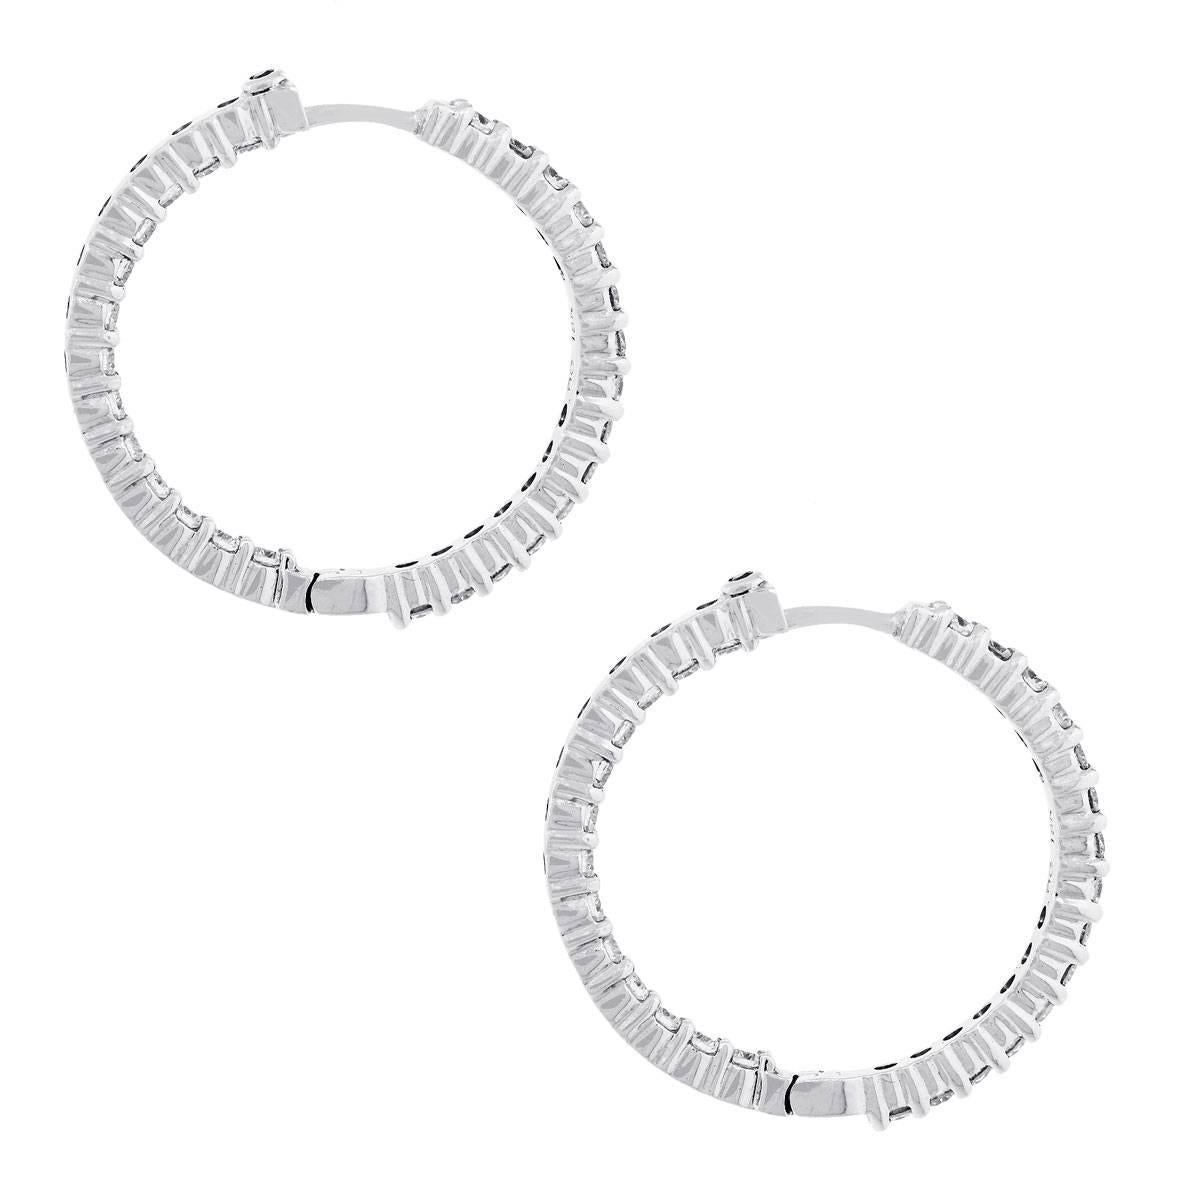 Designer: Roberto Coin
Diamonds Details: Approx. 1.53ctw Round Brilliant Diamonds. Diamonds are G in color, VS in clarity
Material: 18k white gold
Measurements: 0.98″ x 0.078″ x 0.98″
Clasp: Hinged Clasp
Total Weight: 7.8g (5.0dwt)
Additional